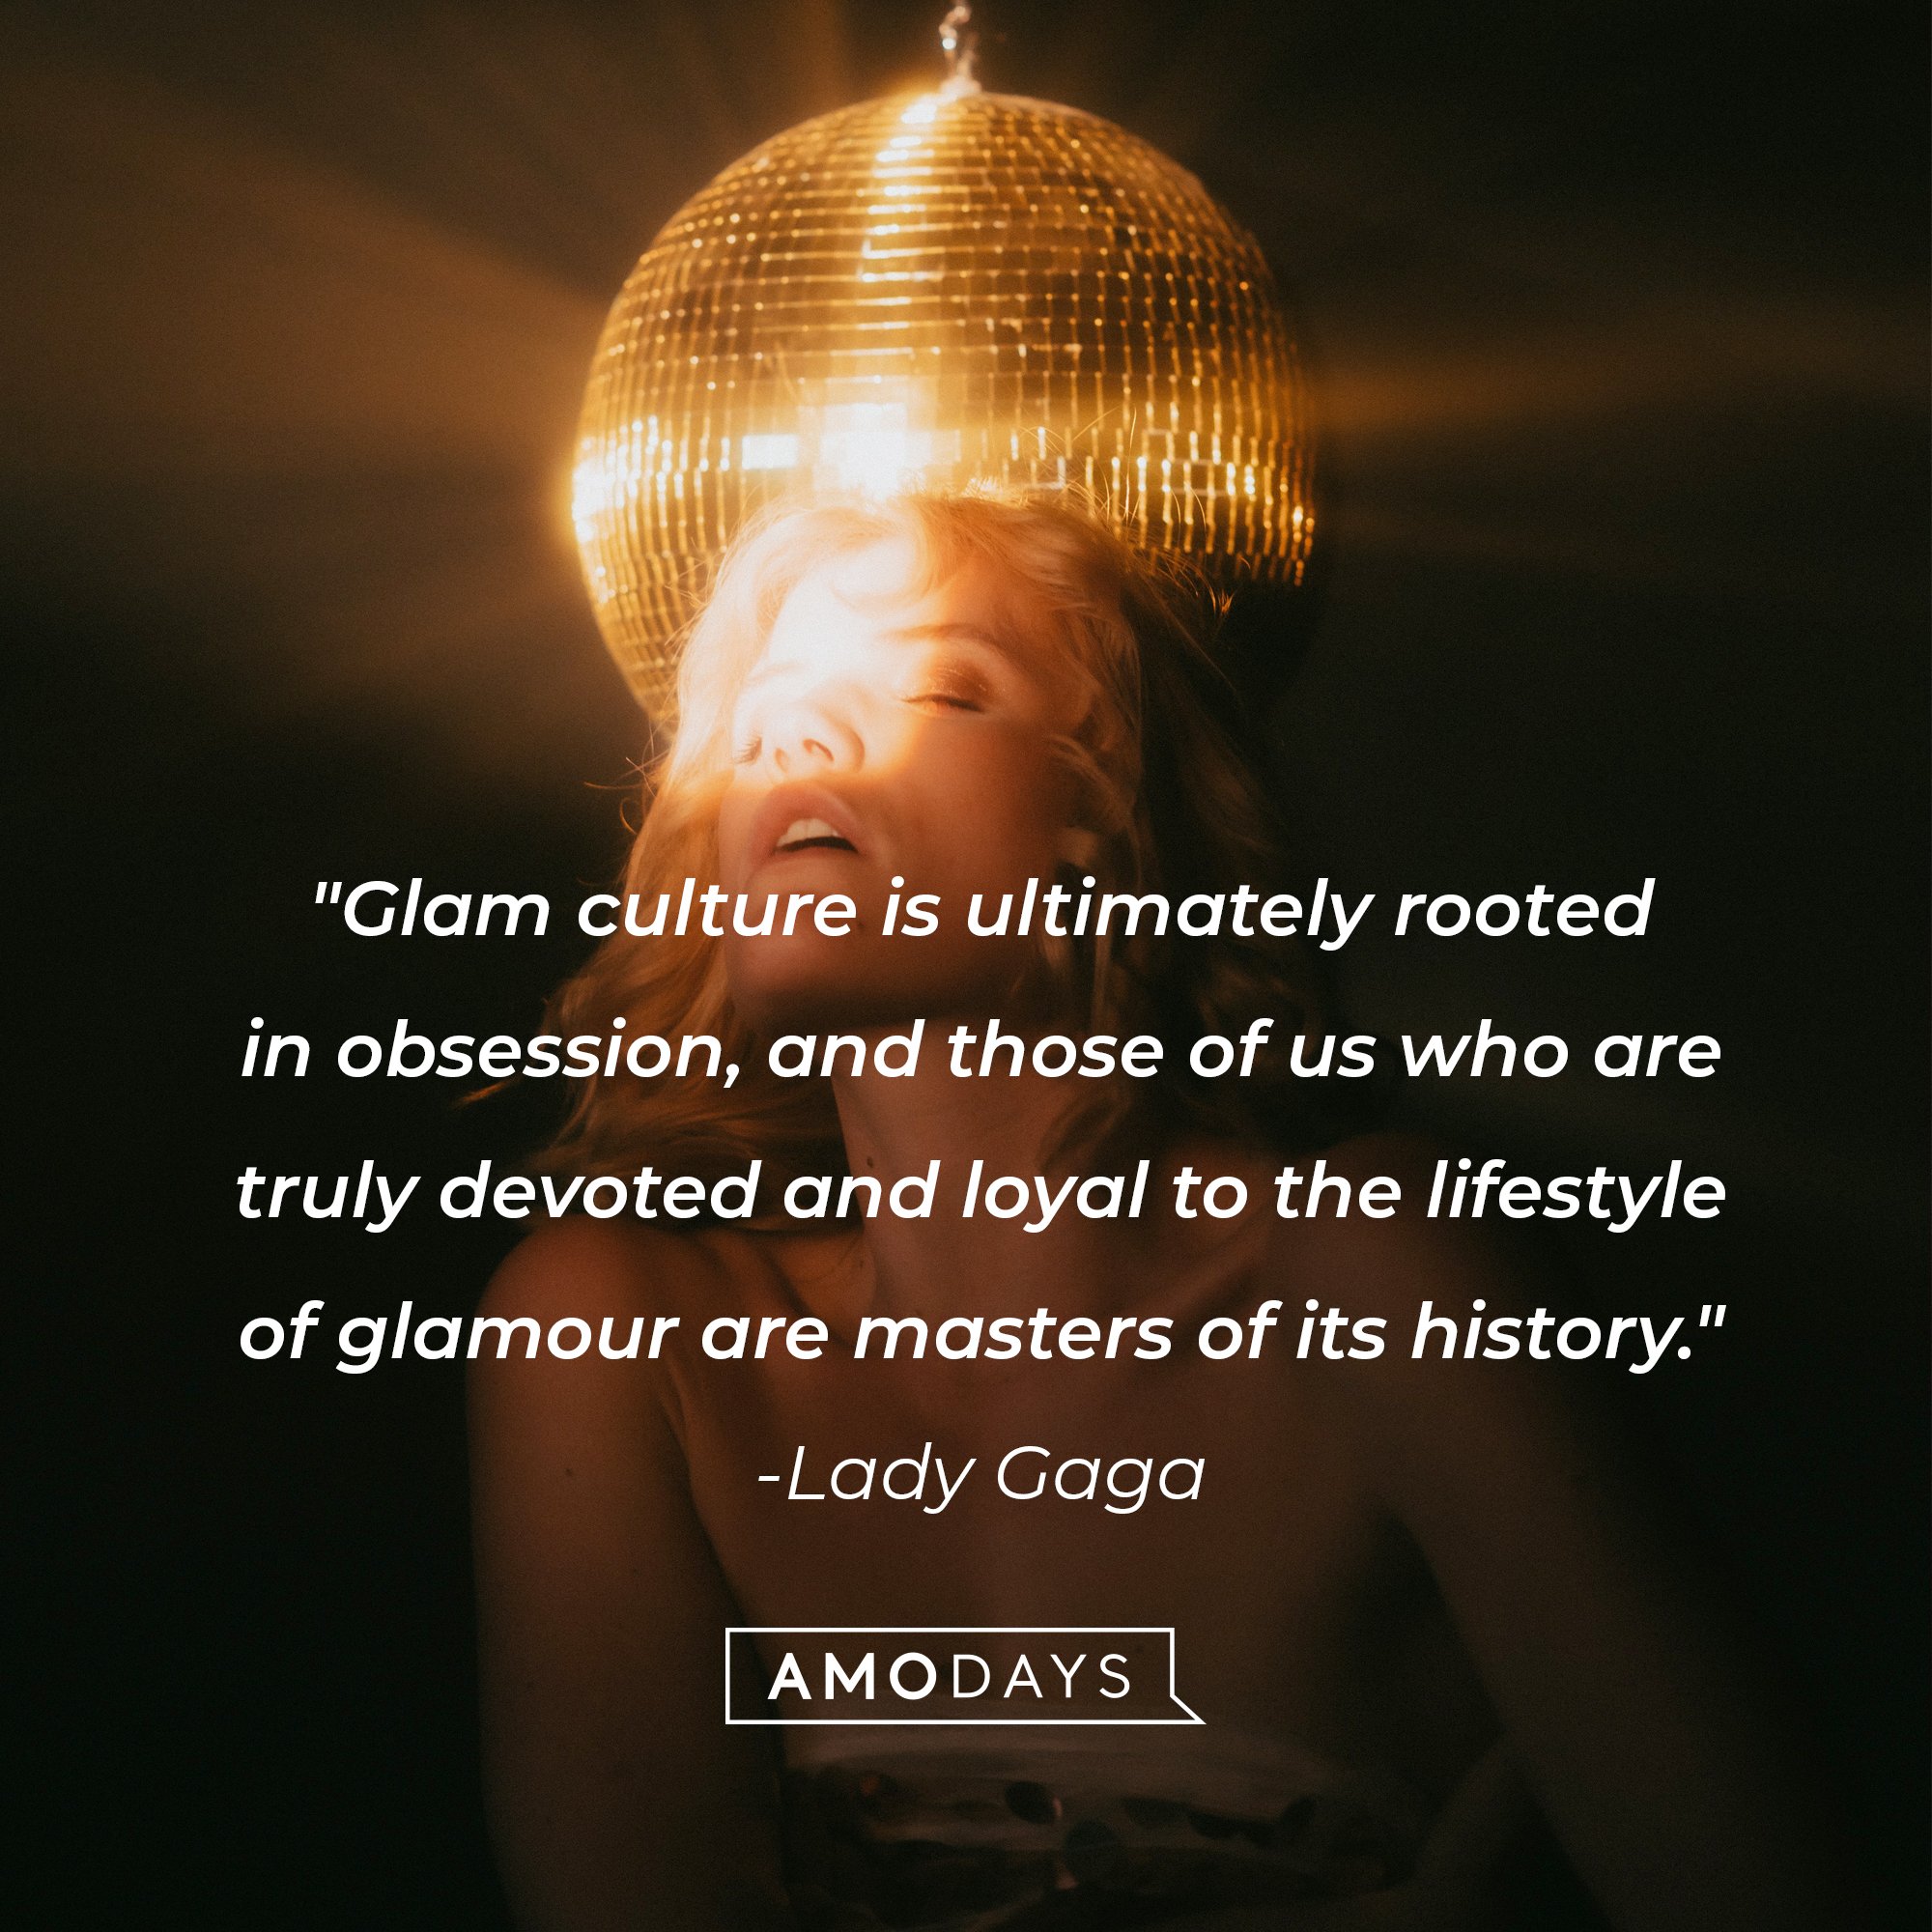 Lady Gaga’s quote: "Glam culture is ultimately rooted in obsession, and those of us who are truly devoted and loyal to the lifestyle of glamour are masters of its history." | Image: AmoDays